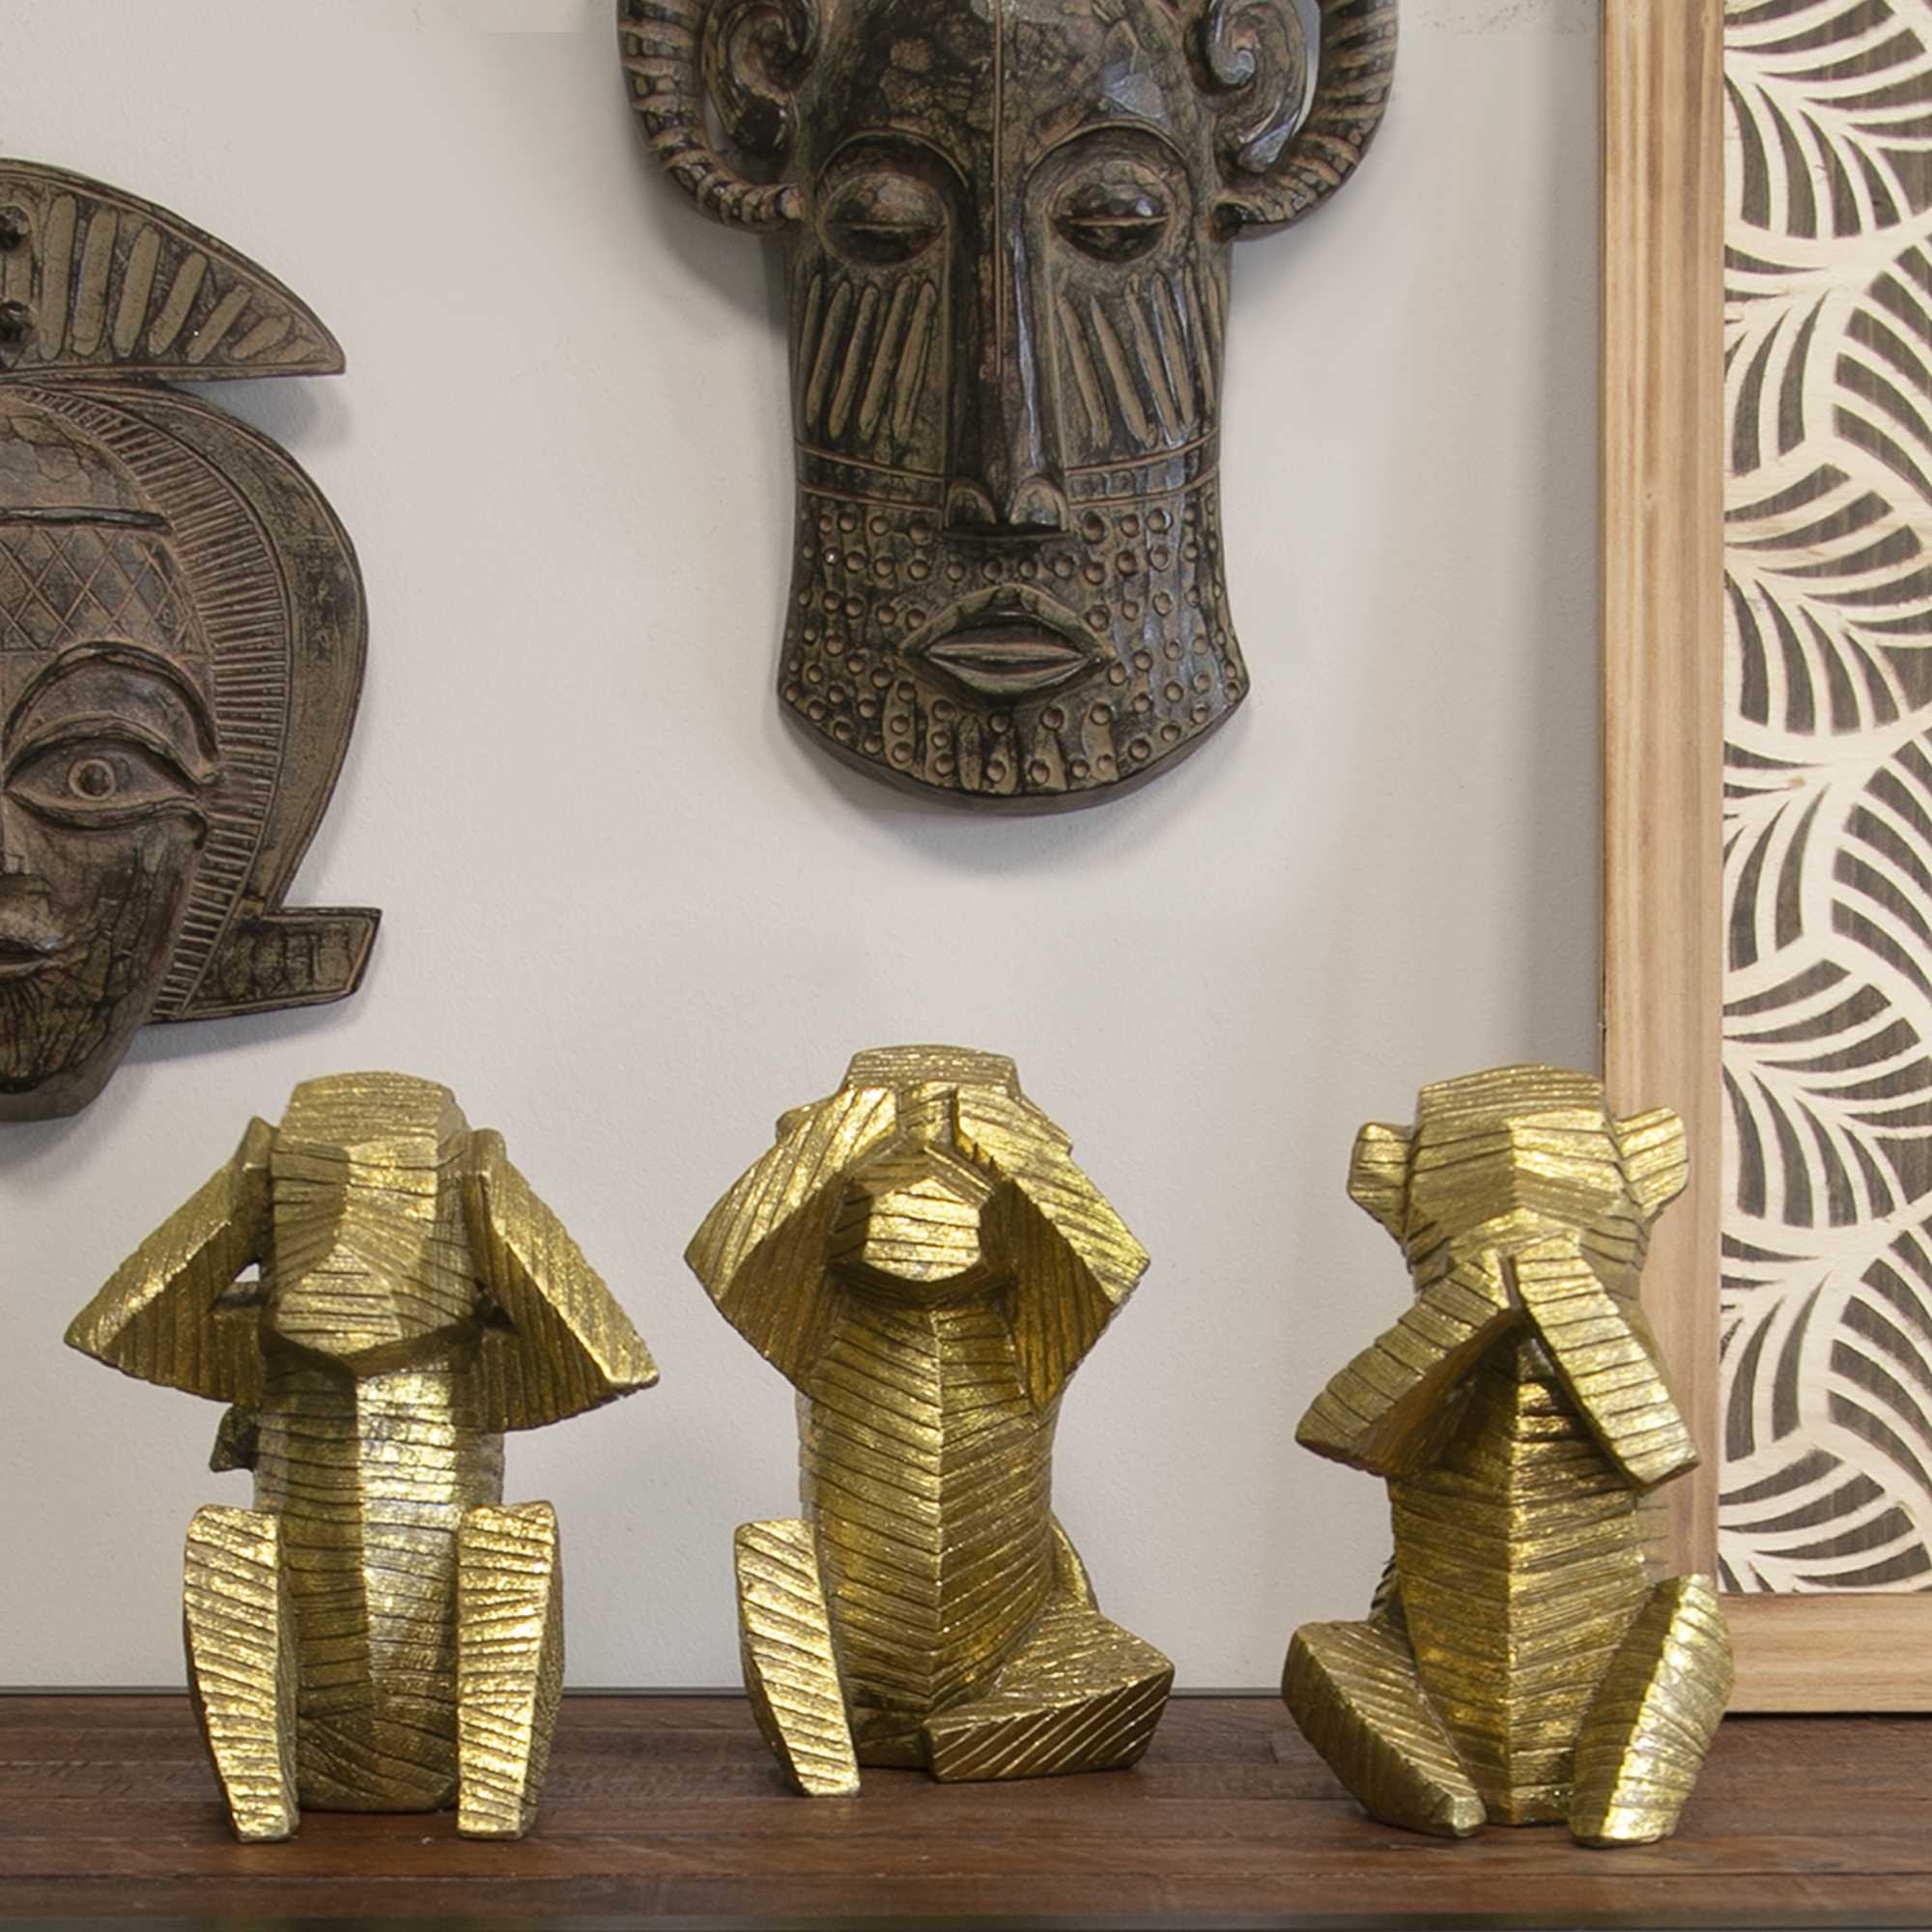 Gold Distressed Wise Monkey Sculptures - Set of 3